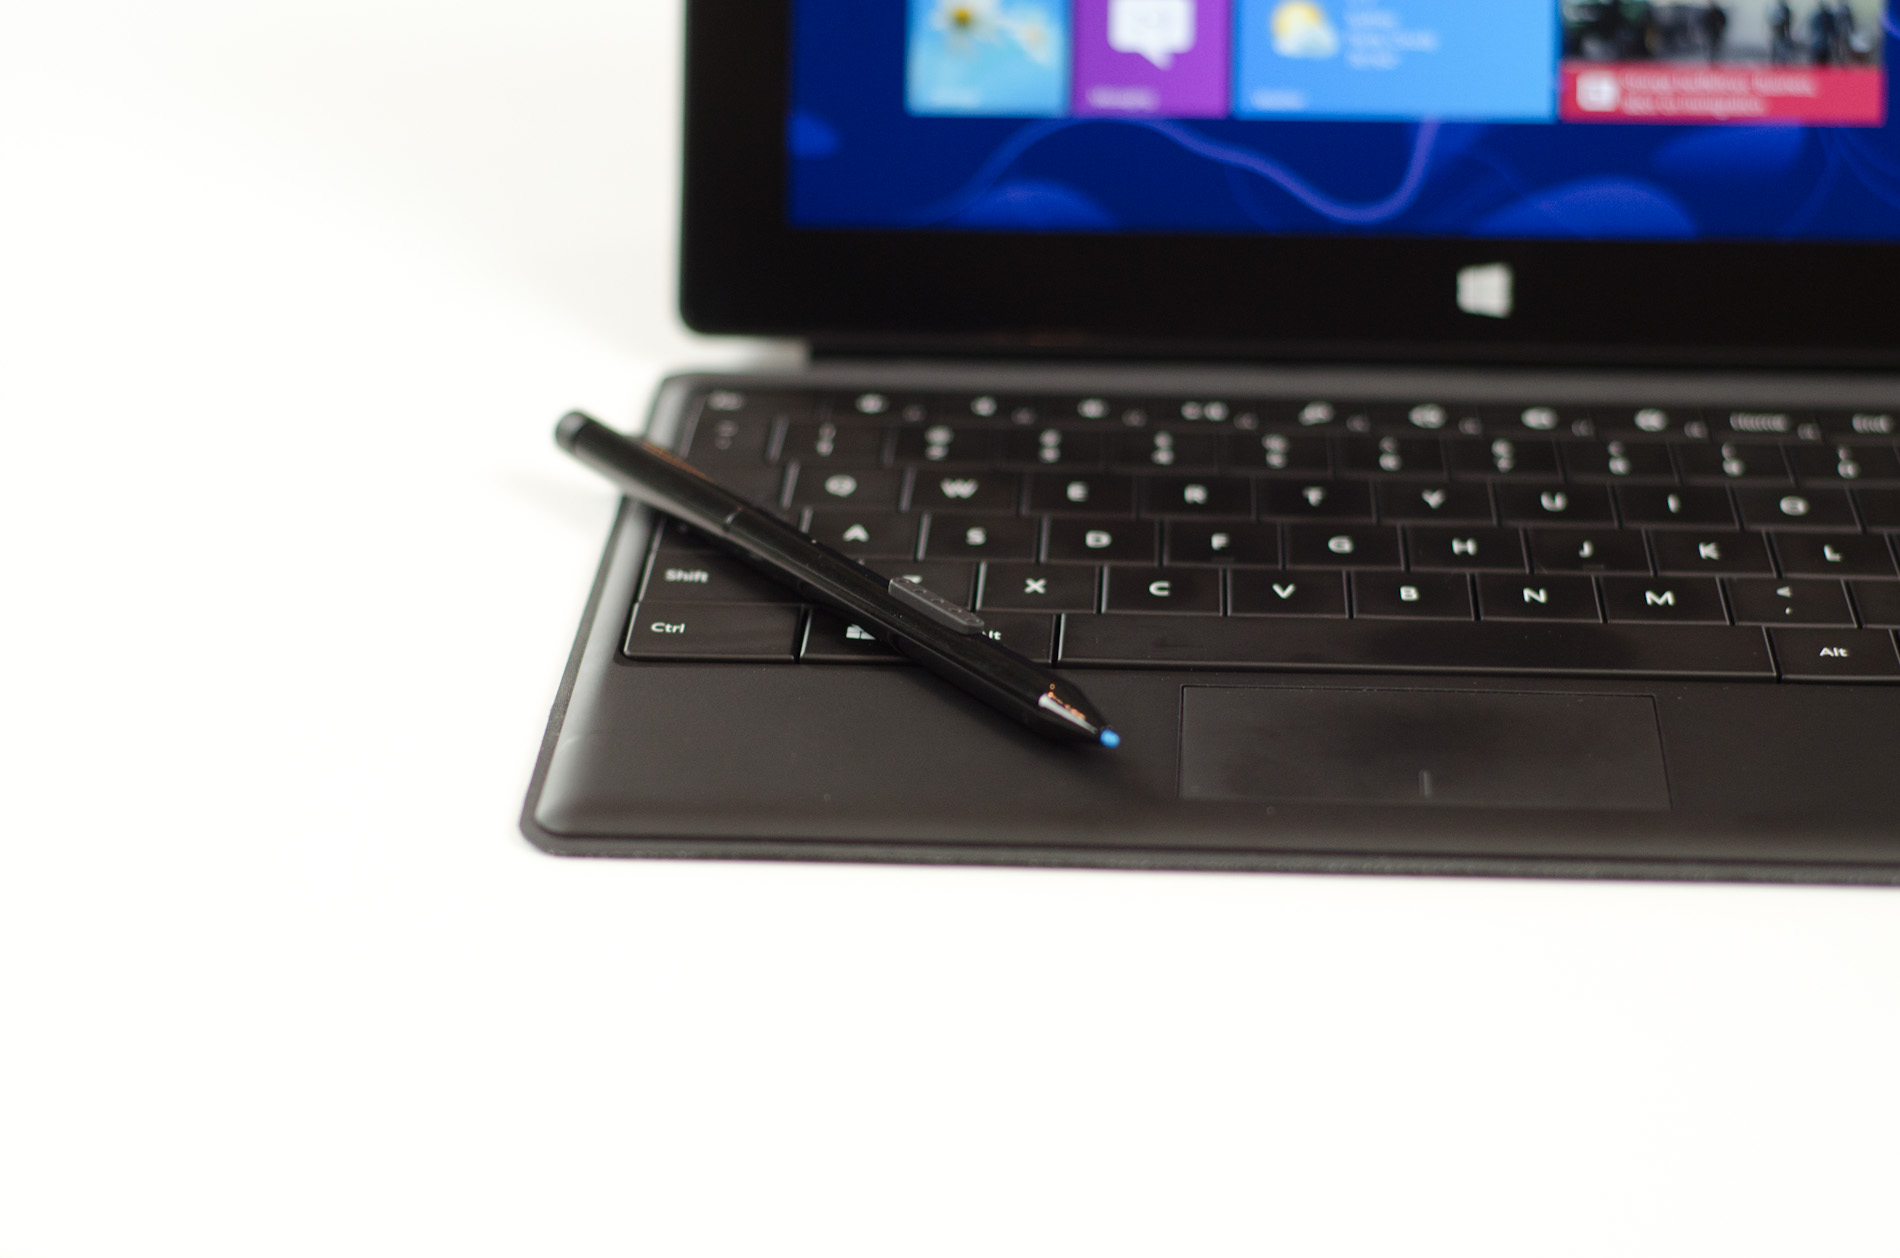 Microsoft Surface Pro Tablet